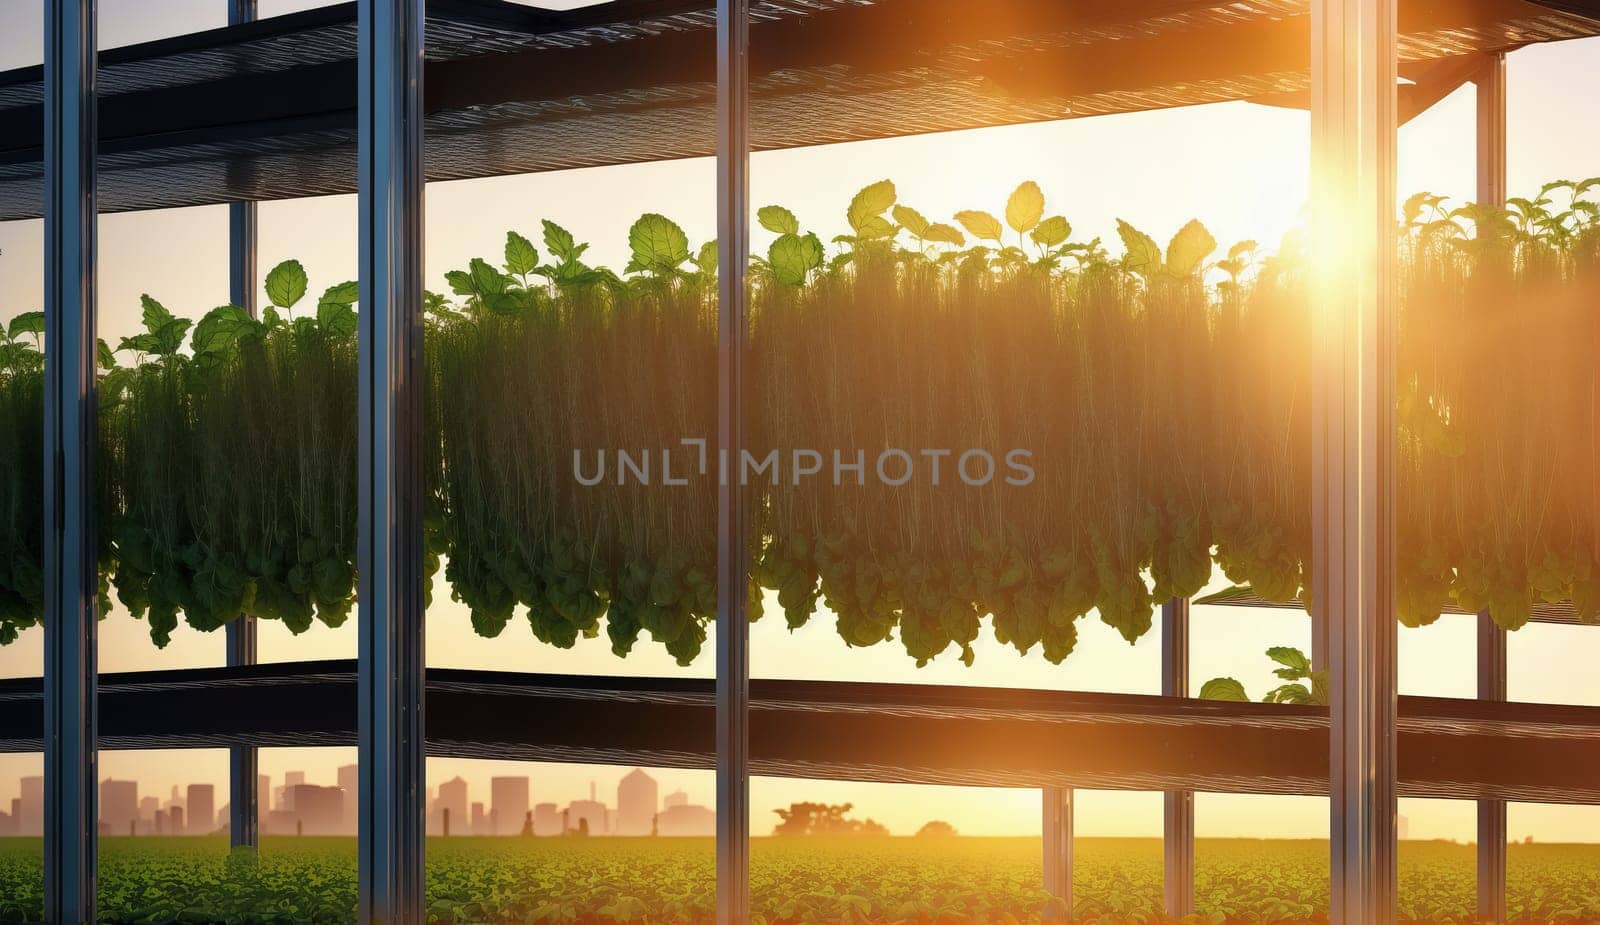 Plants in a greenhouse, sunlight through windows, surrounded by lush greenery by DCStudio